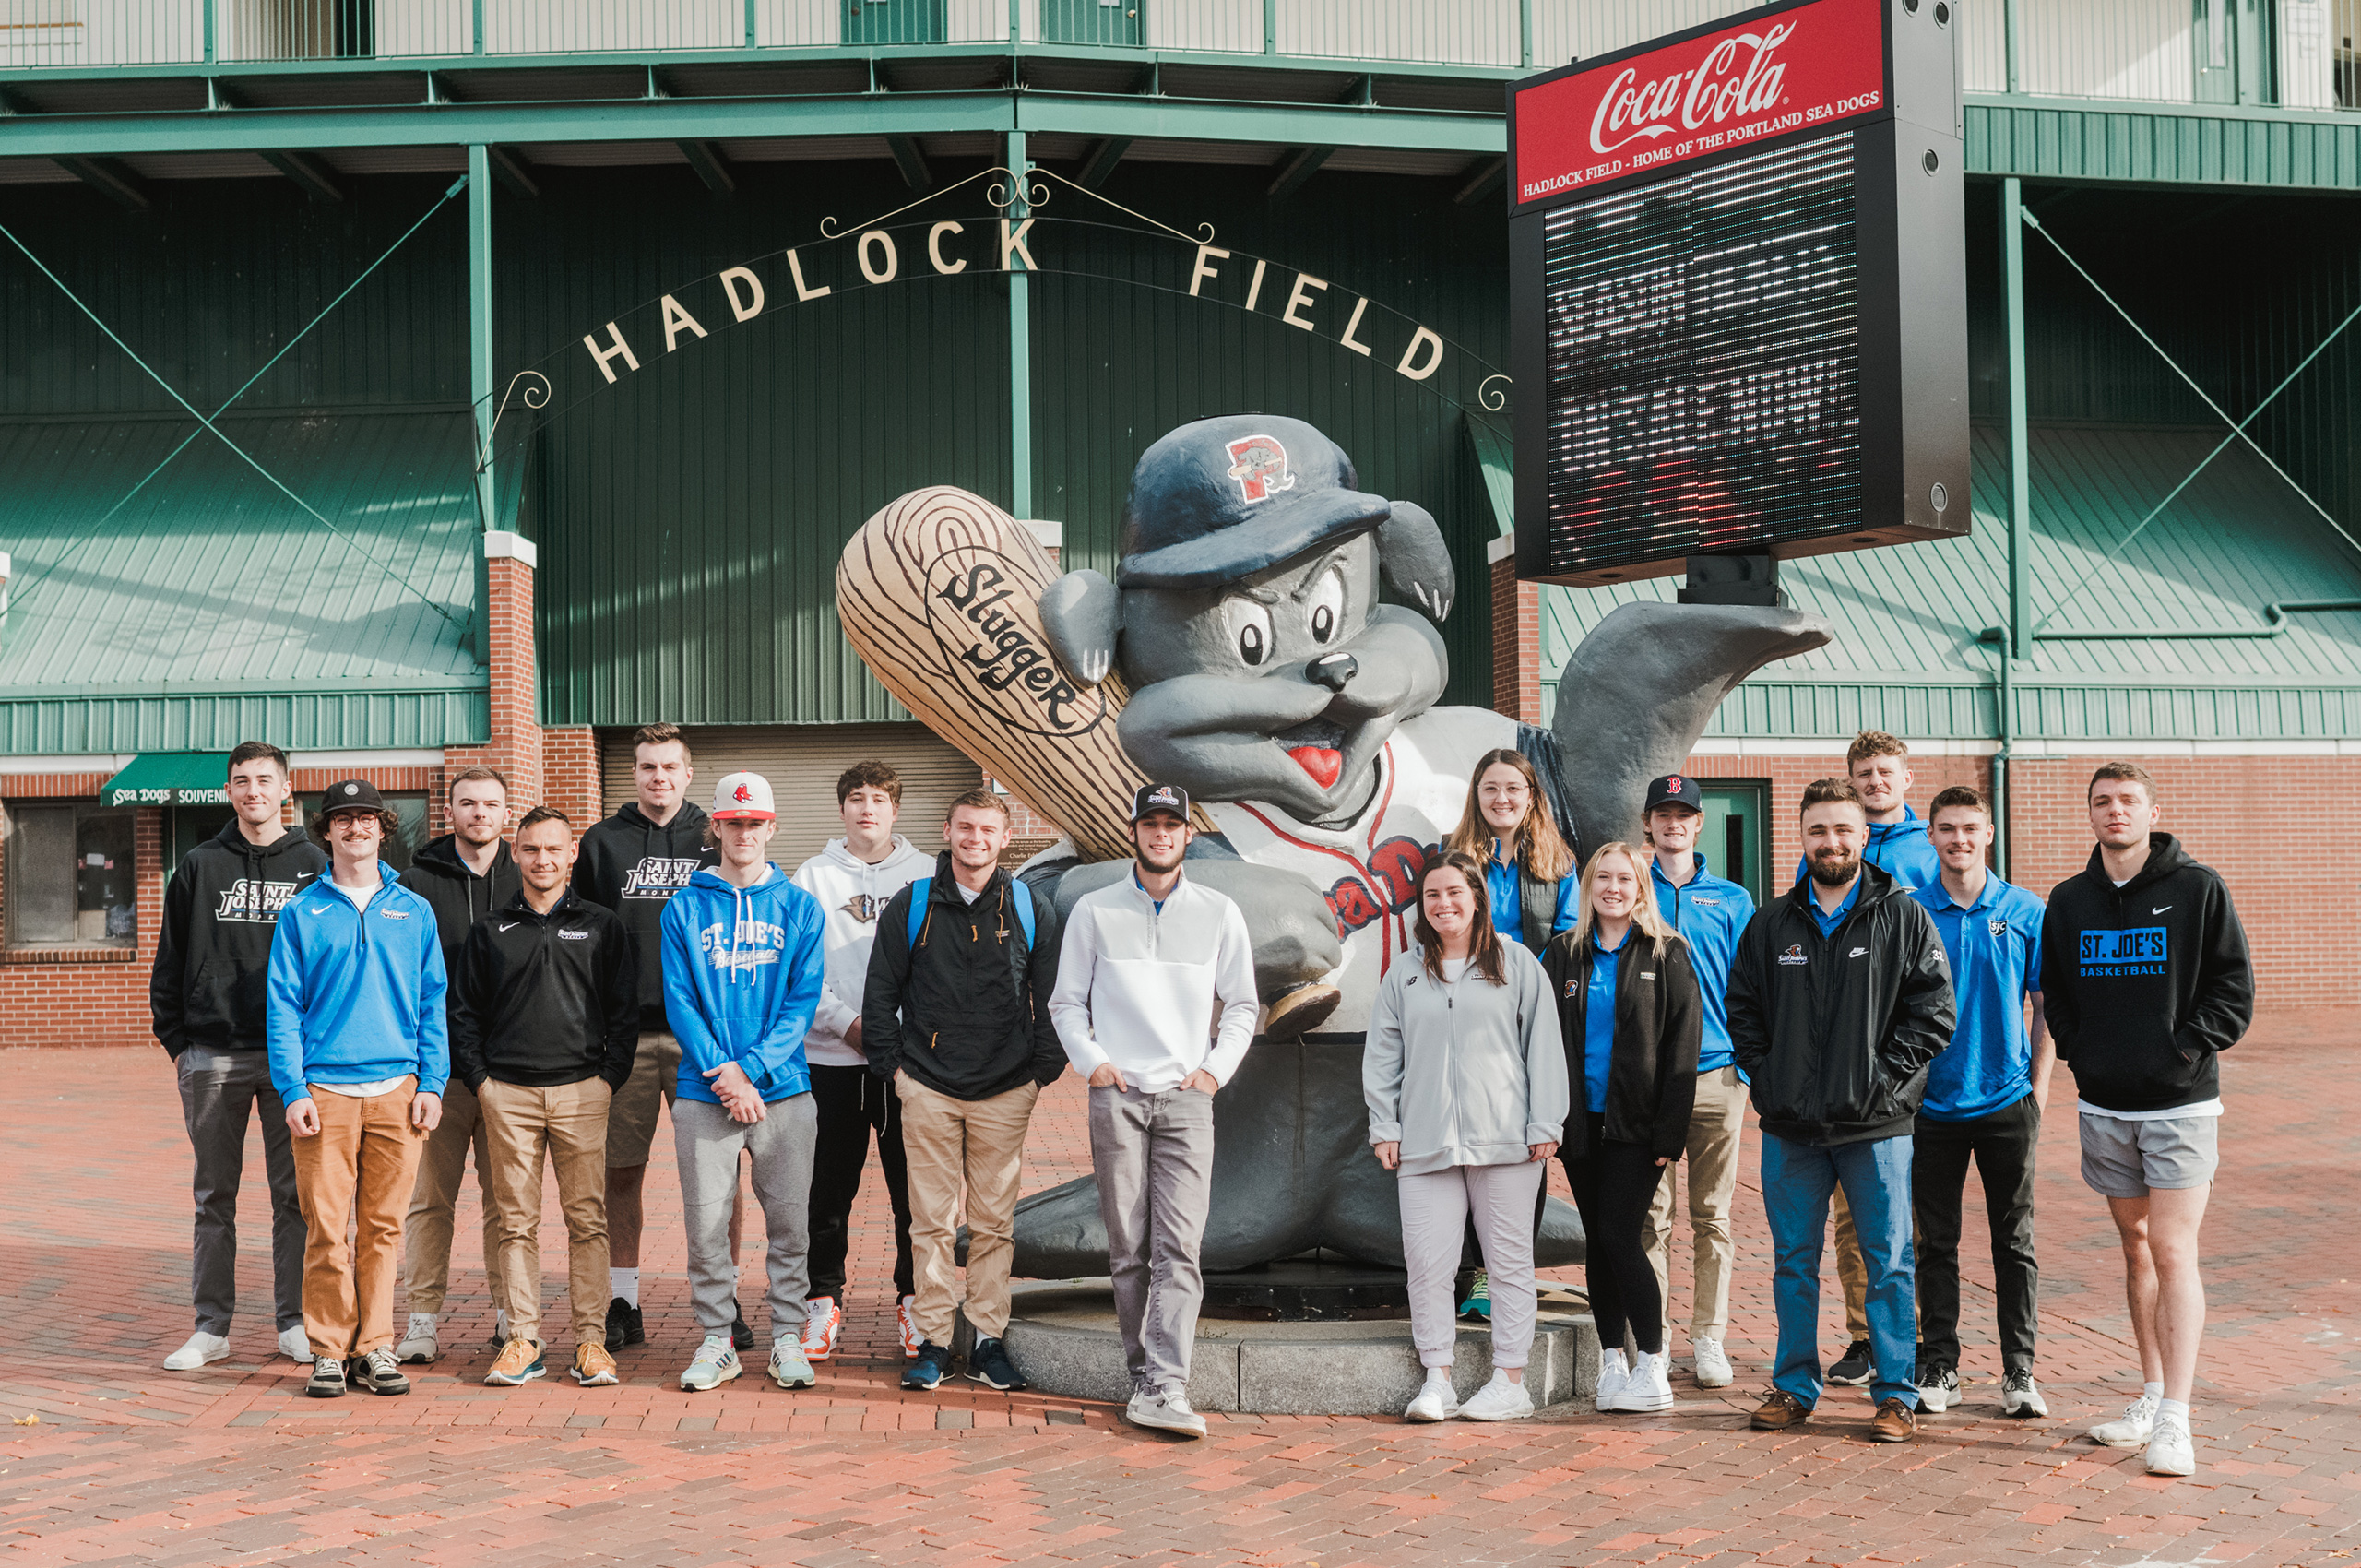 Sport and recreation management students visit Hadlock field to learn about facility management of the complex.